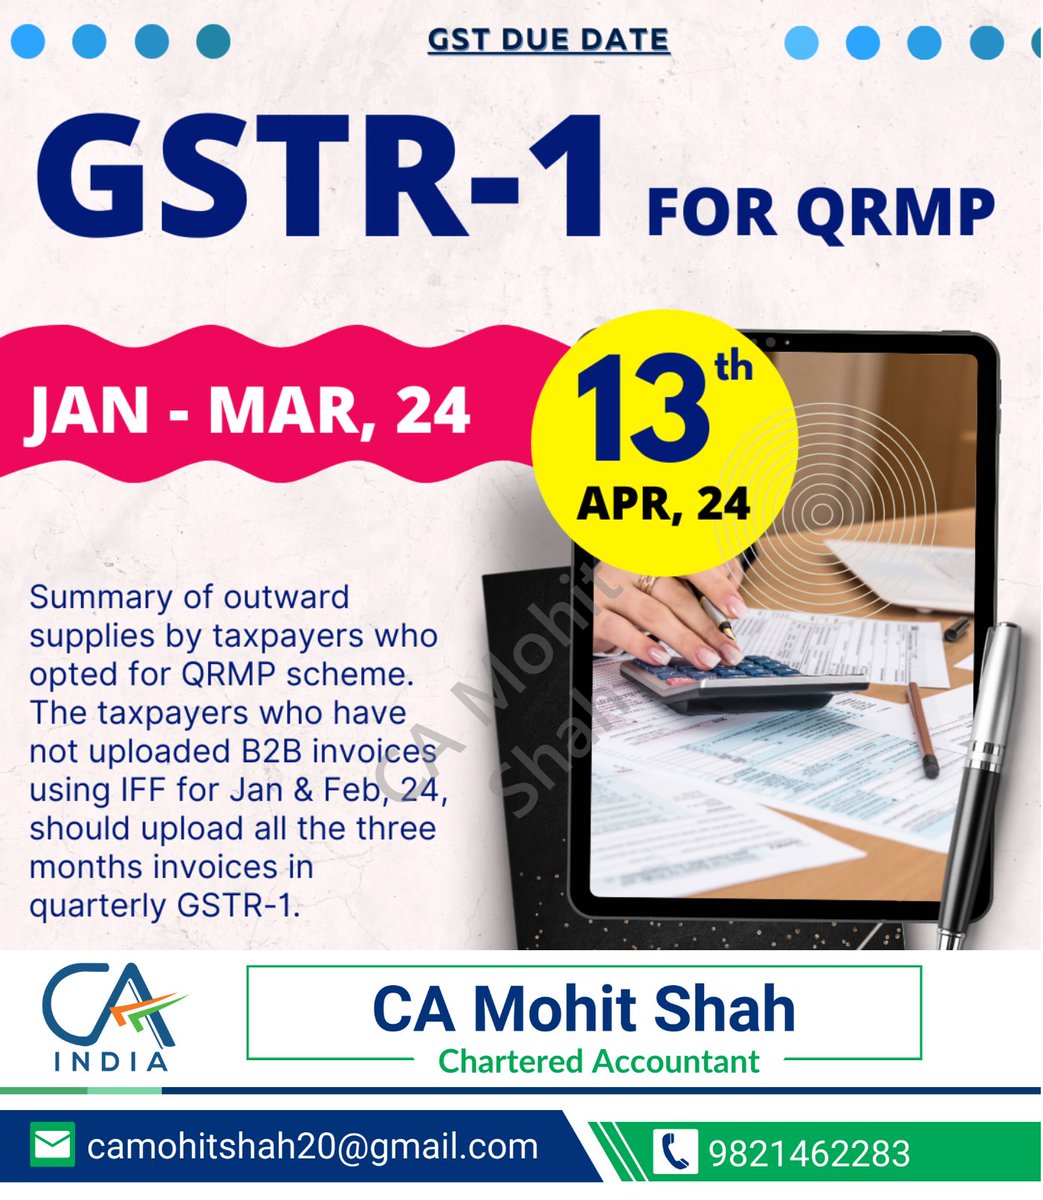 Taxpayers under QRMP scheme, don't forget to file GSTR-1 for Jan-Mar 2024 quarter by 13th April,2024. Stay GST compliant!    

#GSTR1 #QRMP #GSTReturns #TaxFiling #SmallBusiness #SMEs #TaxCompliance #GSTIndia #QuarterlyFiling #BusinessTaxation